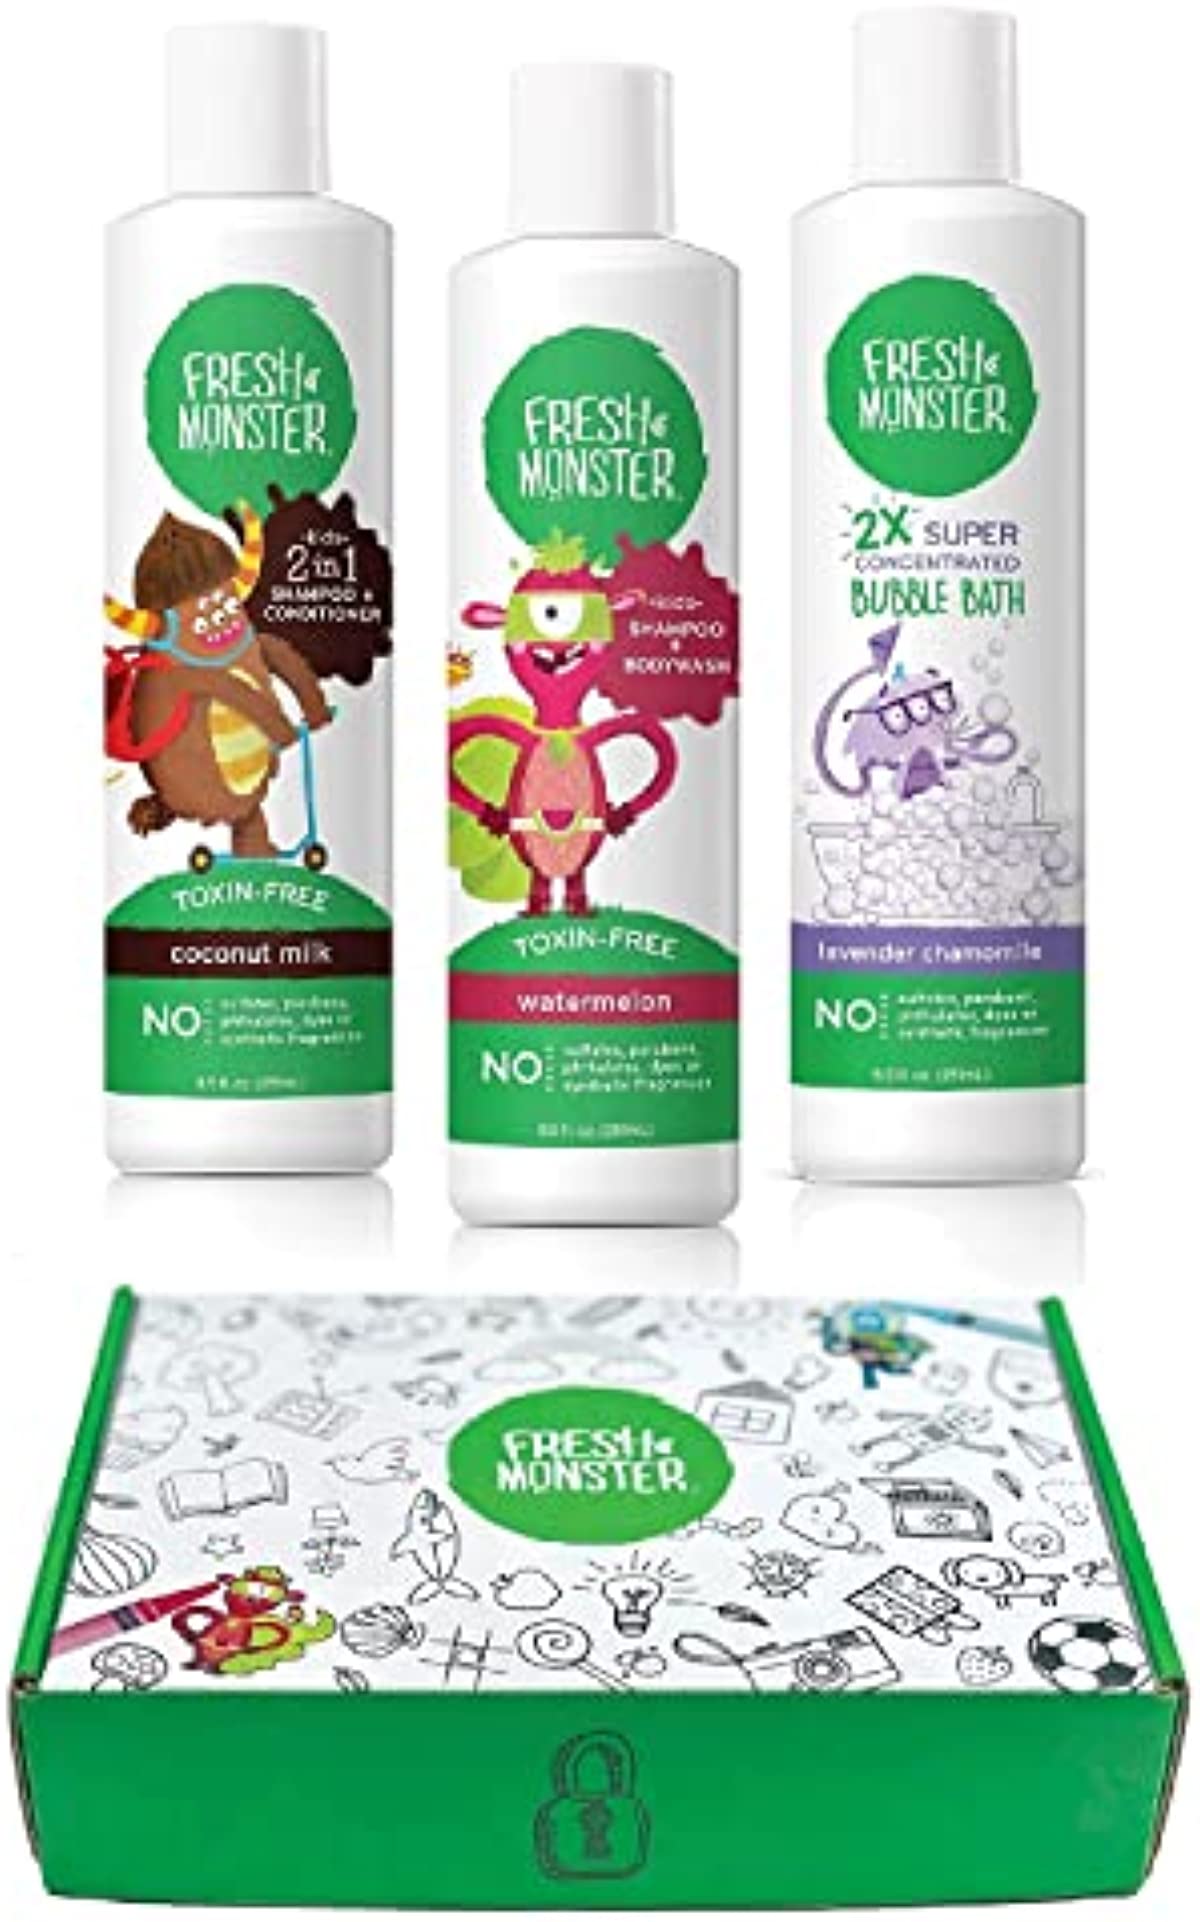 Fresh Monster Kids & Baby Gift Set, Natural, Toxin-Free Shampoo & Conditioner, Body Wash, and Bubble Bath (3 Piece Set, 8.5oz/each)